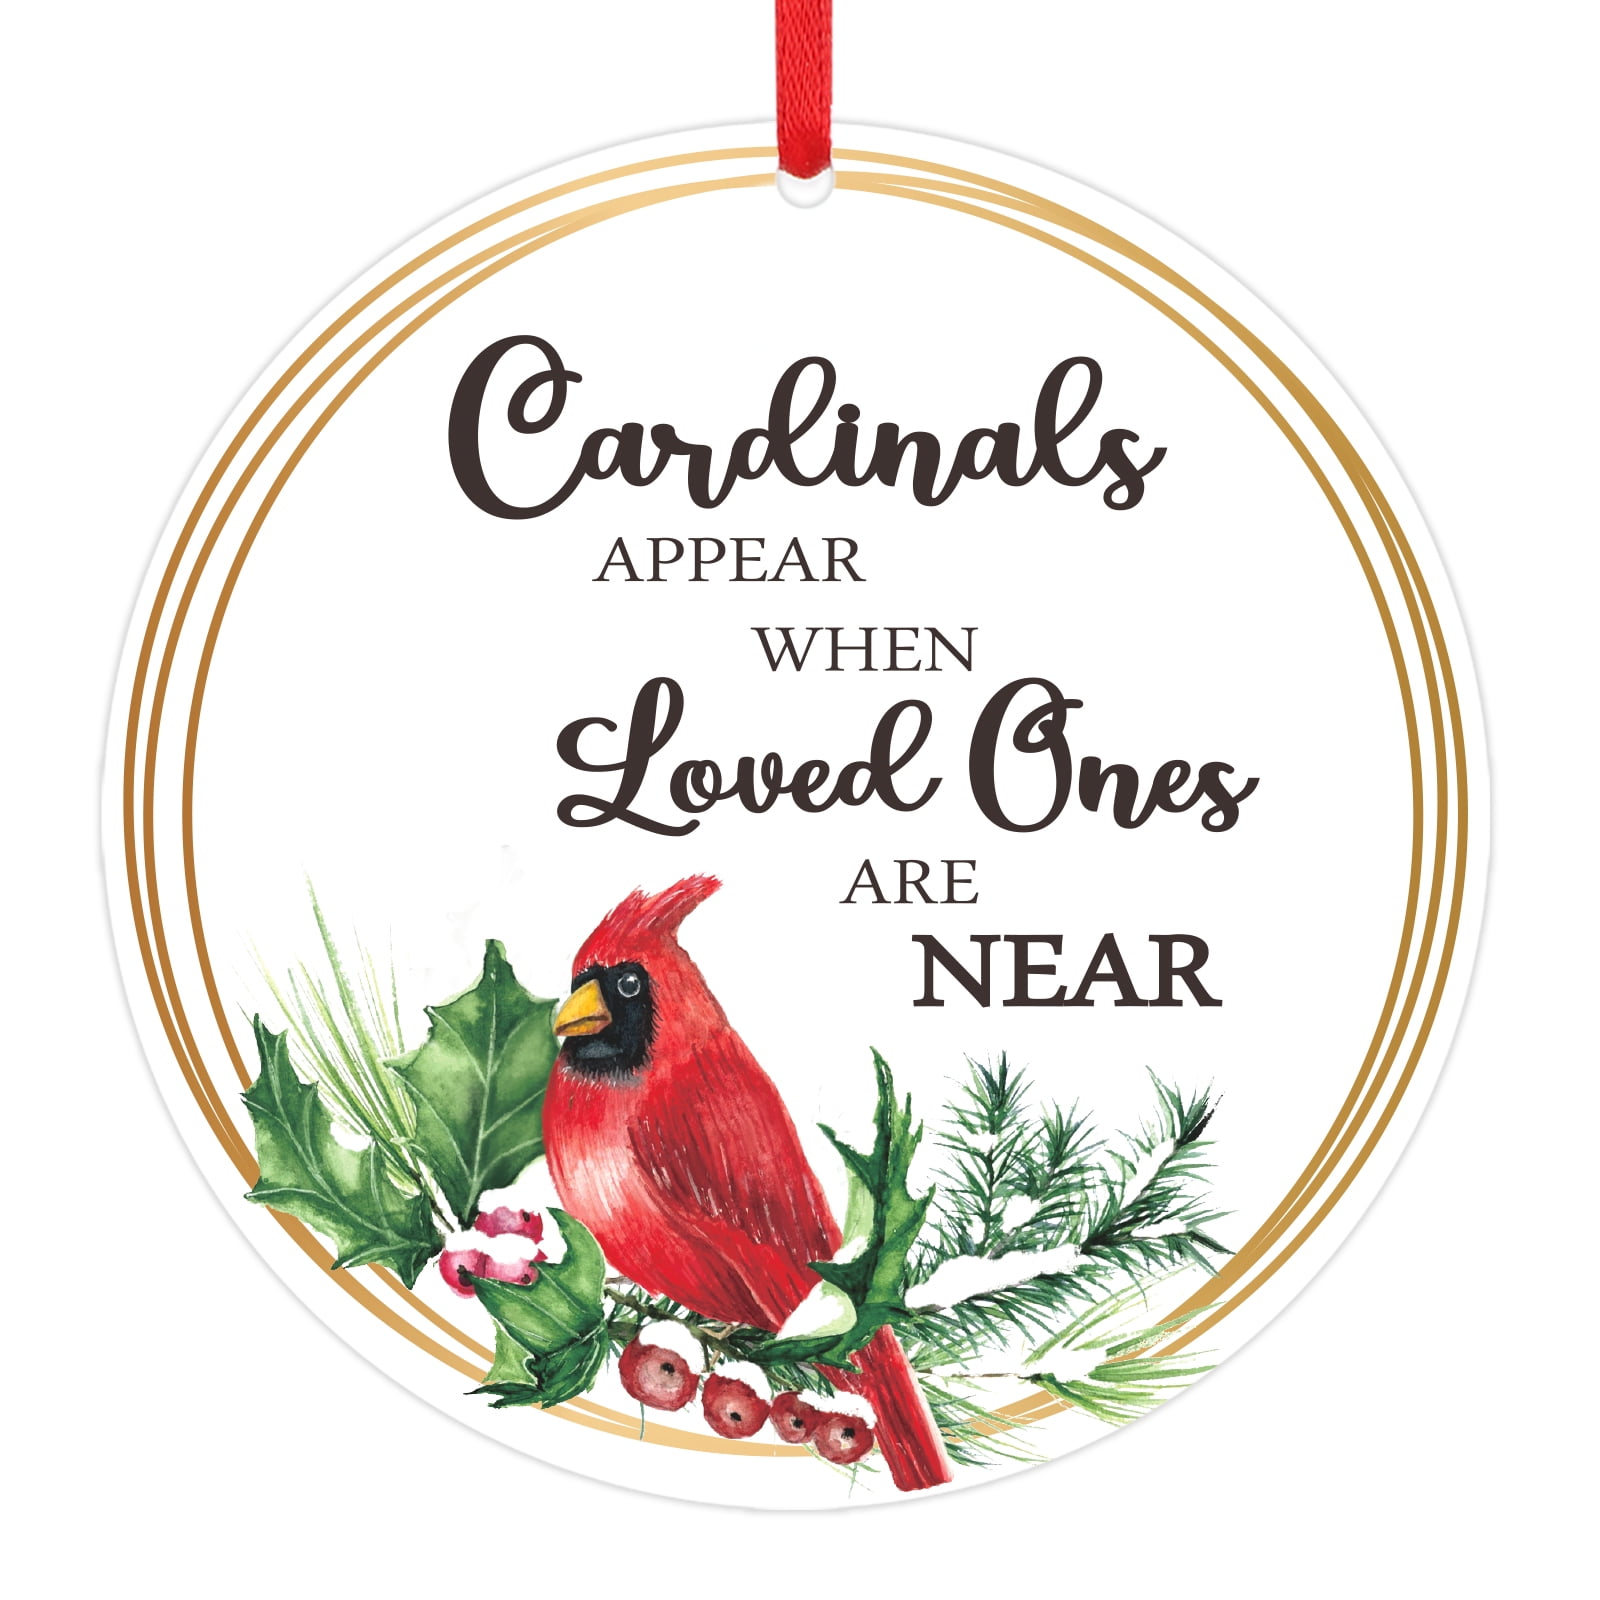 When a Cardinal Appears It's a Visitor from Heaven Ornaments 3 Red Cardinal Christmas Tree Ornaments Decorations Sympathy Gifts for Families Friends Hohomark Memorial Christmas Ornaments